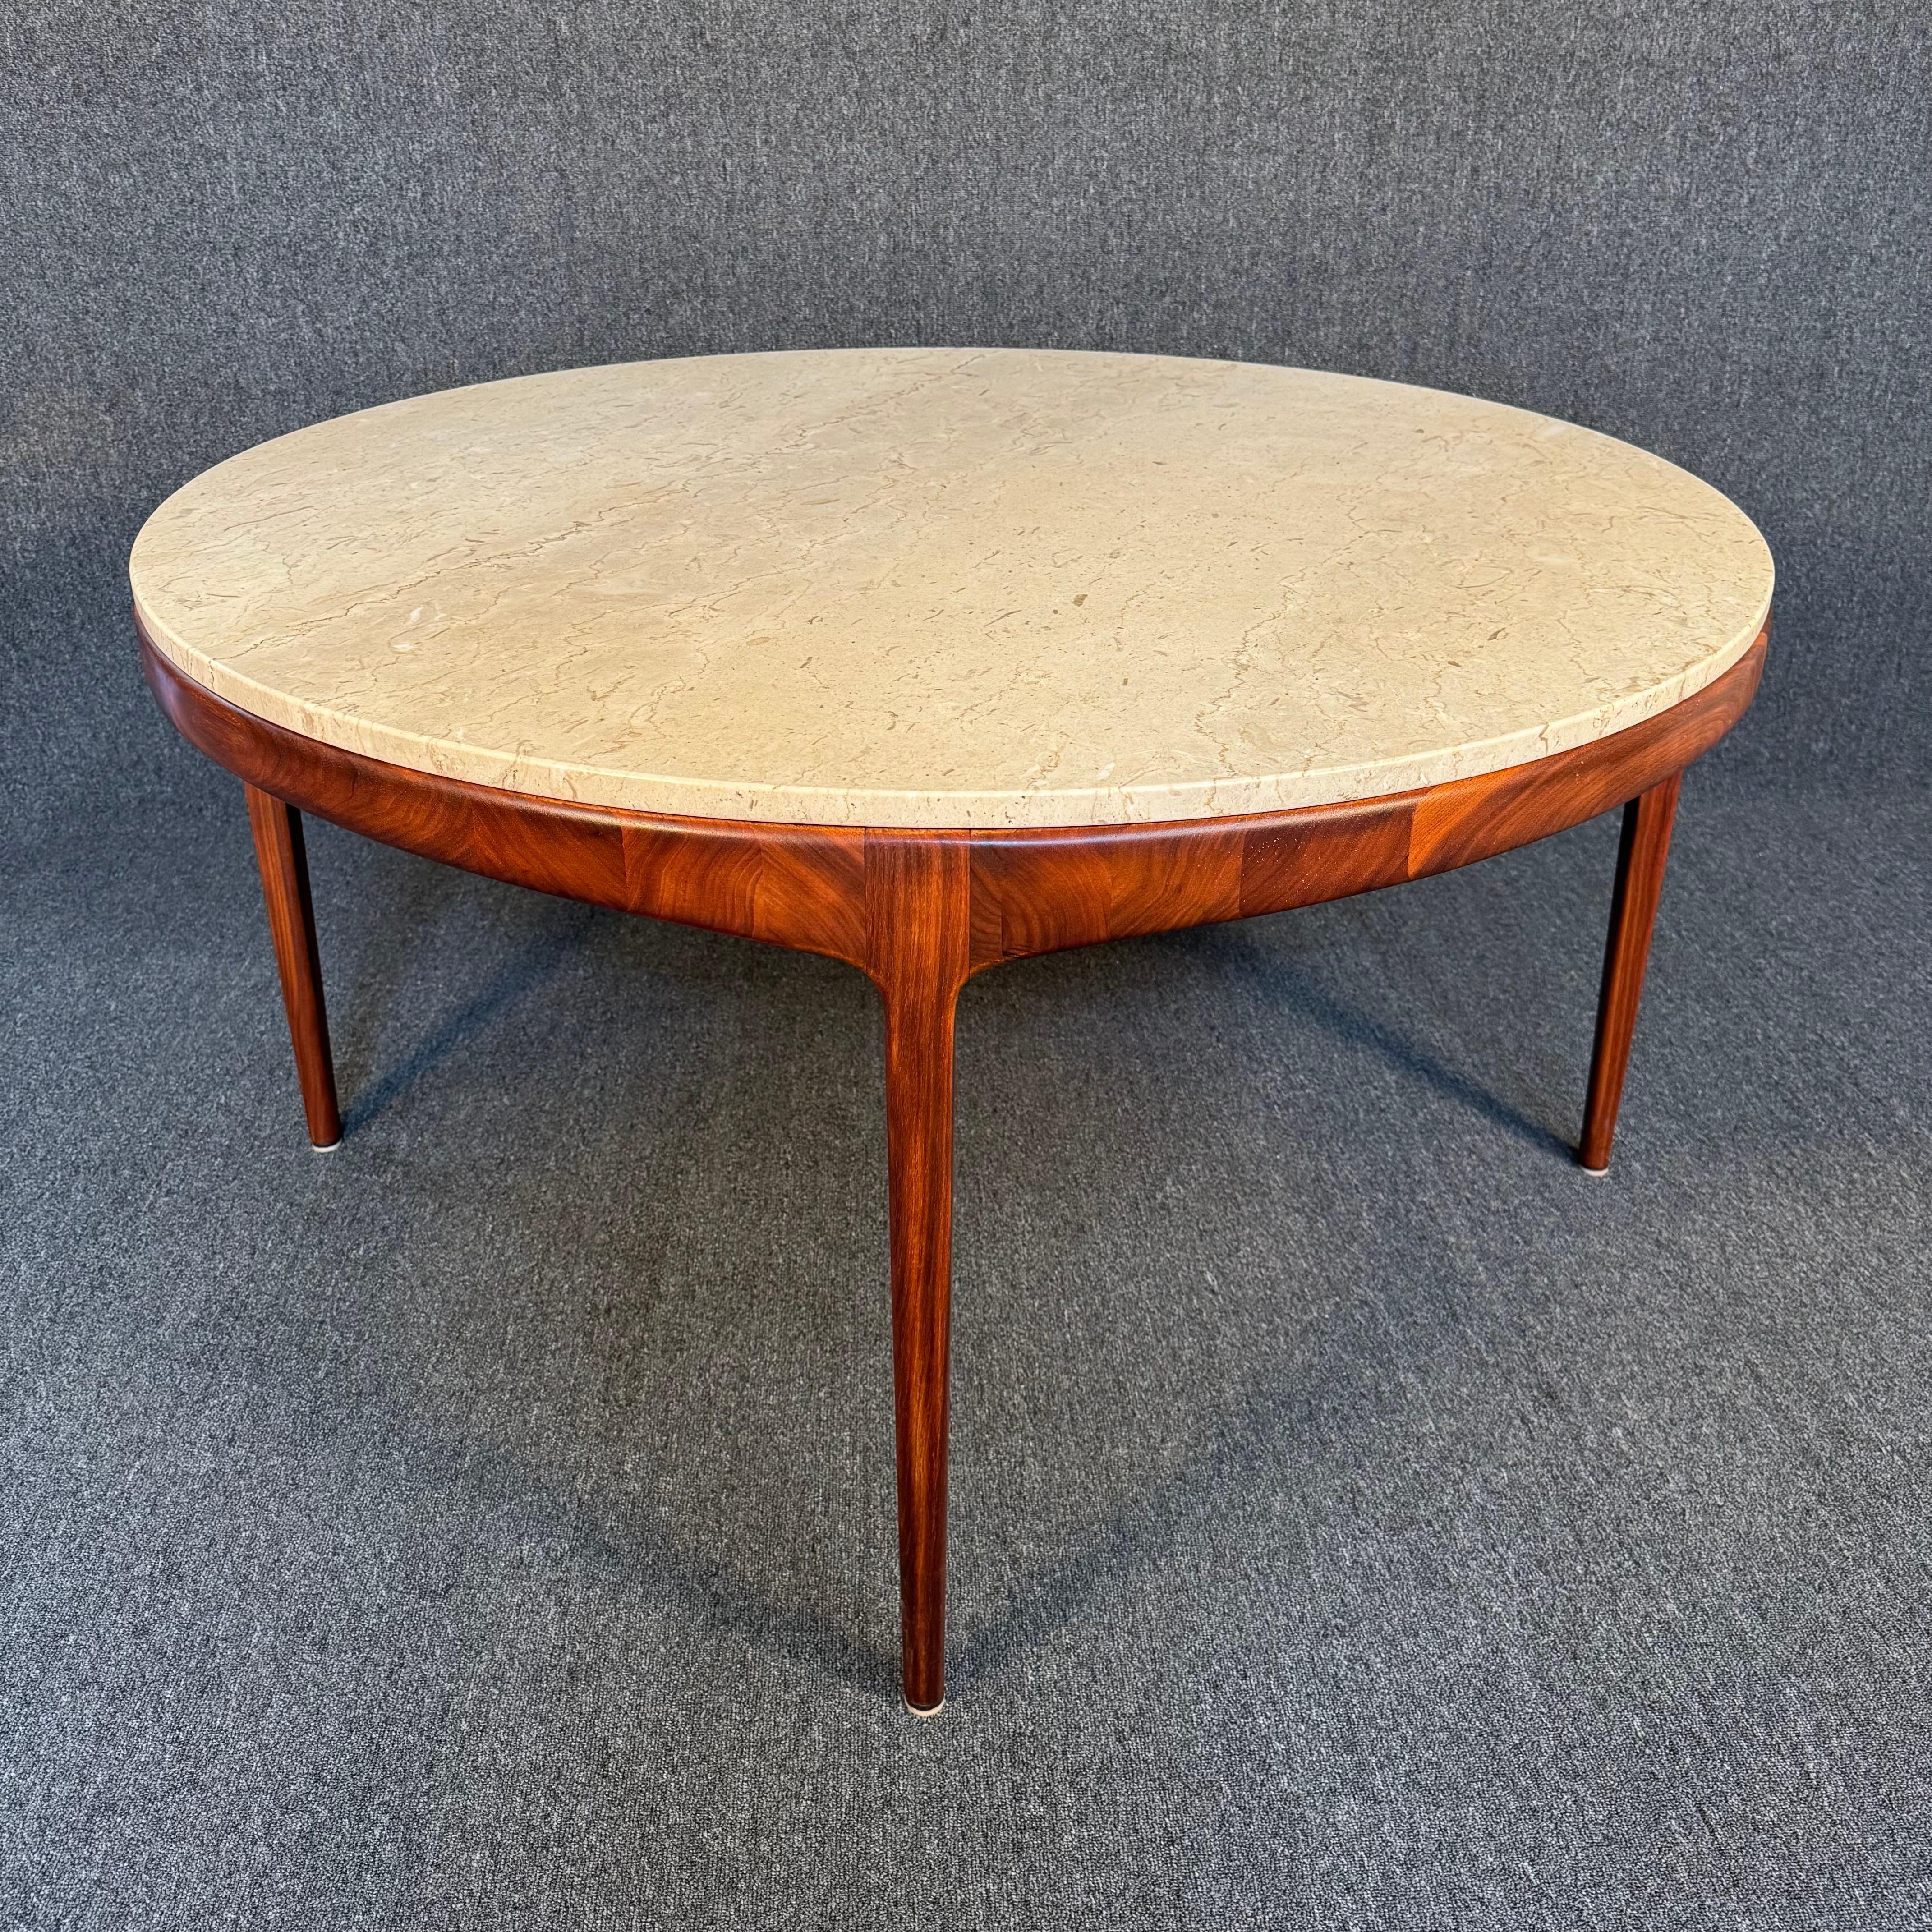 Here is a beautiful mid century modern game table manufactured by Lane in the IUS in the 1960's.
This exquisite table features a fully restored walnut frame, stretchers and tapered legs showing vibrant grain details paired with a round marble